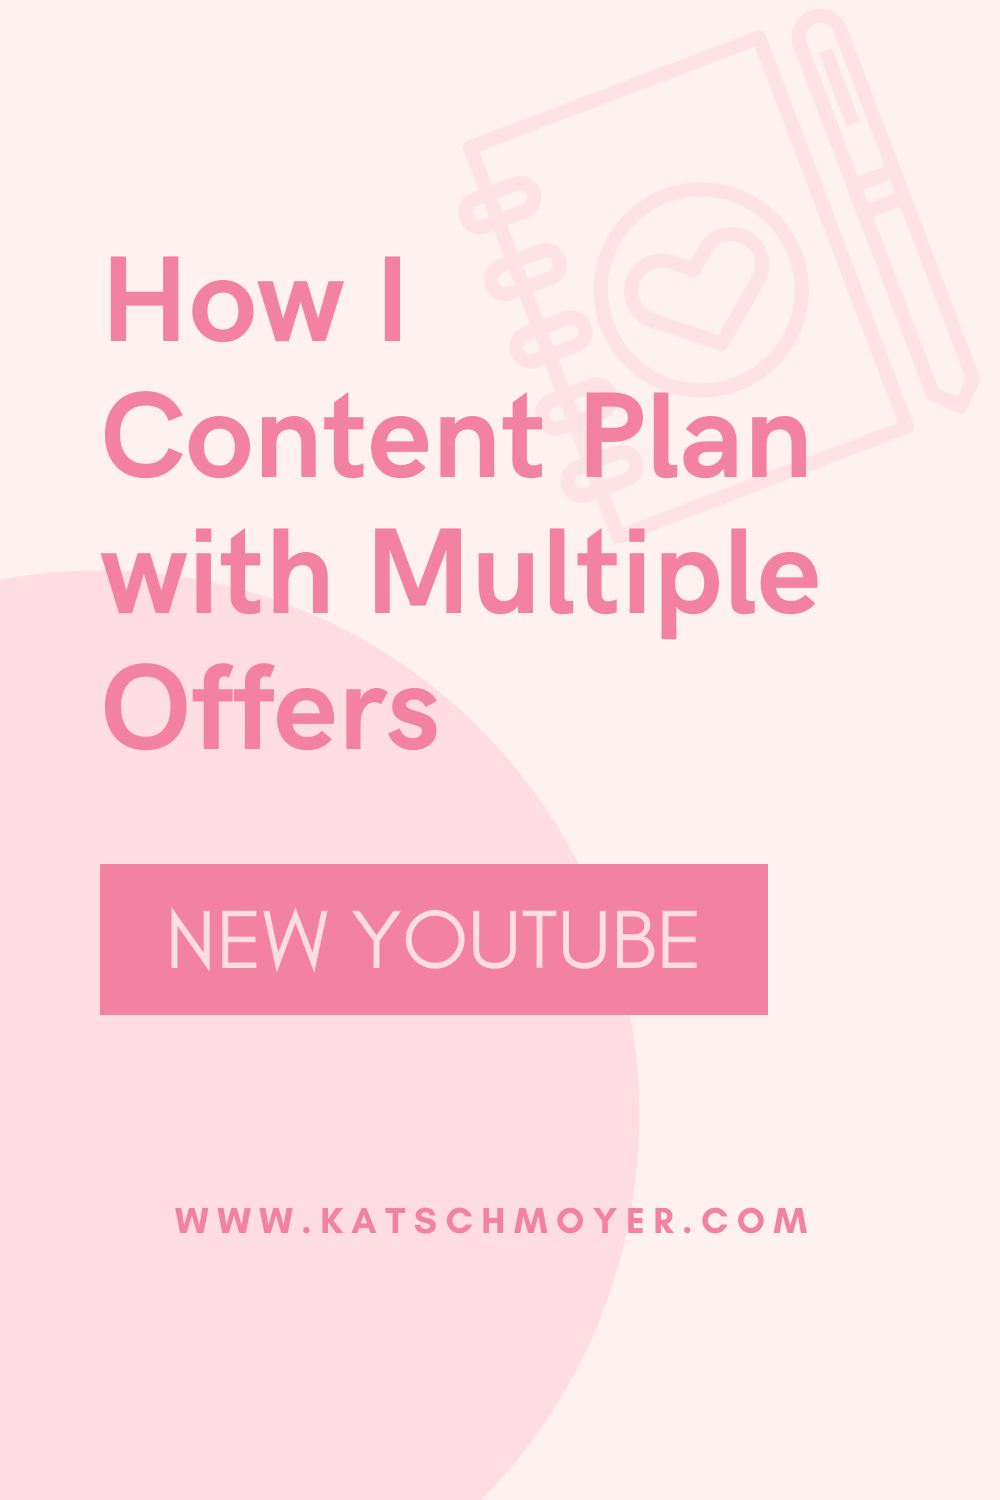 How I Content Plan with Multiple Offers